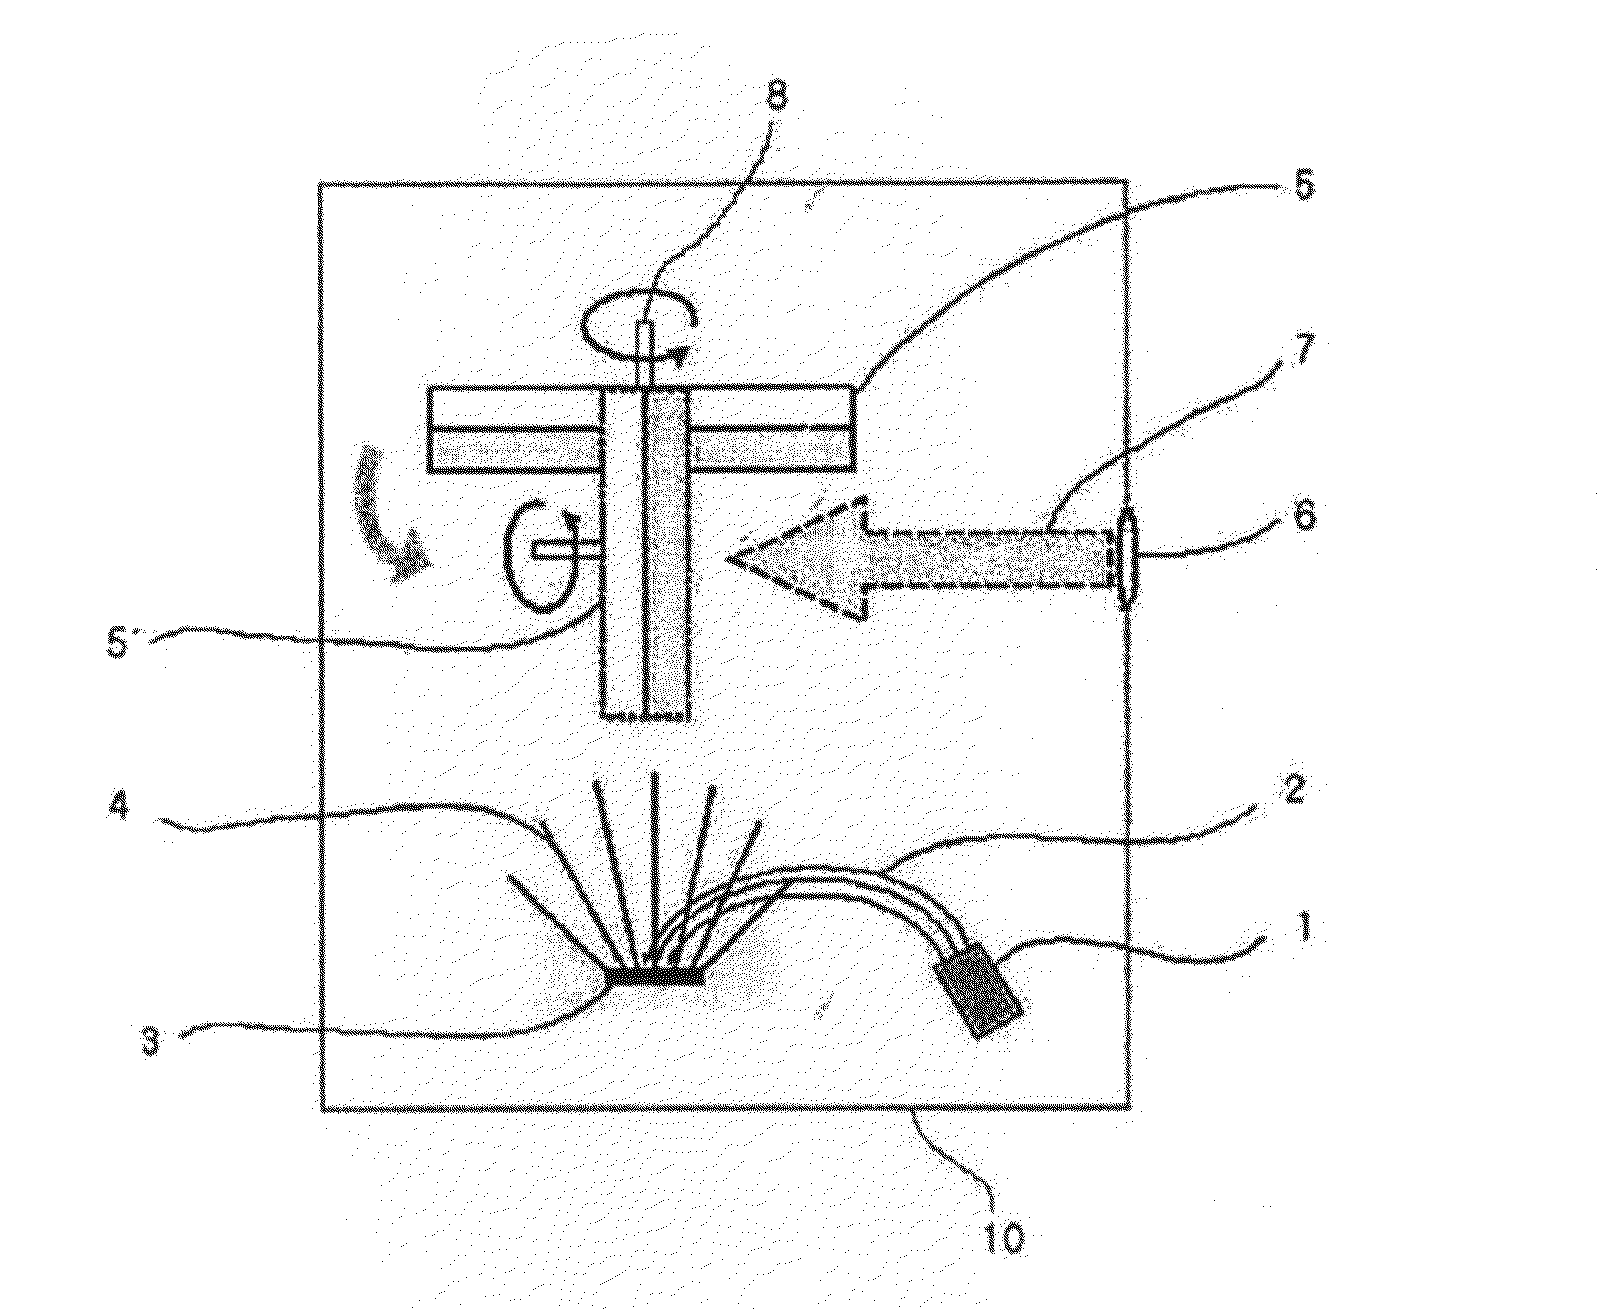 Coating and ion beam mixing apparatus and method to enhance the corrosion resistance of the materials at the elevated temperature using the same